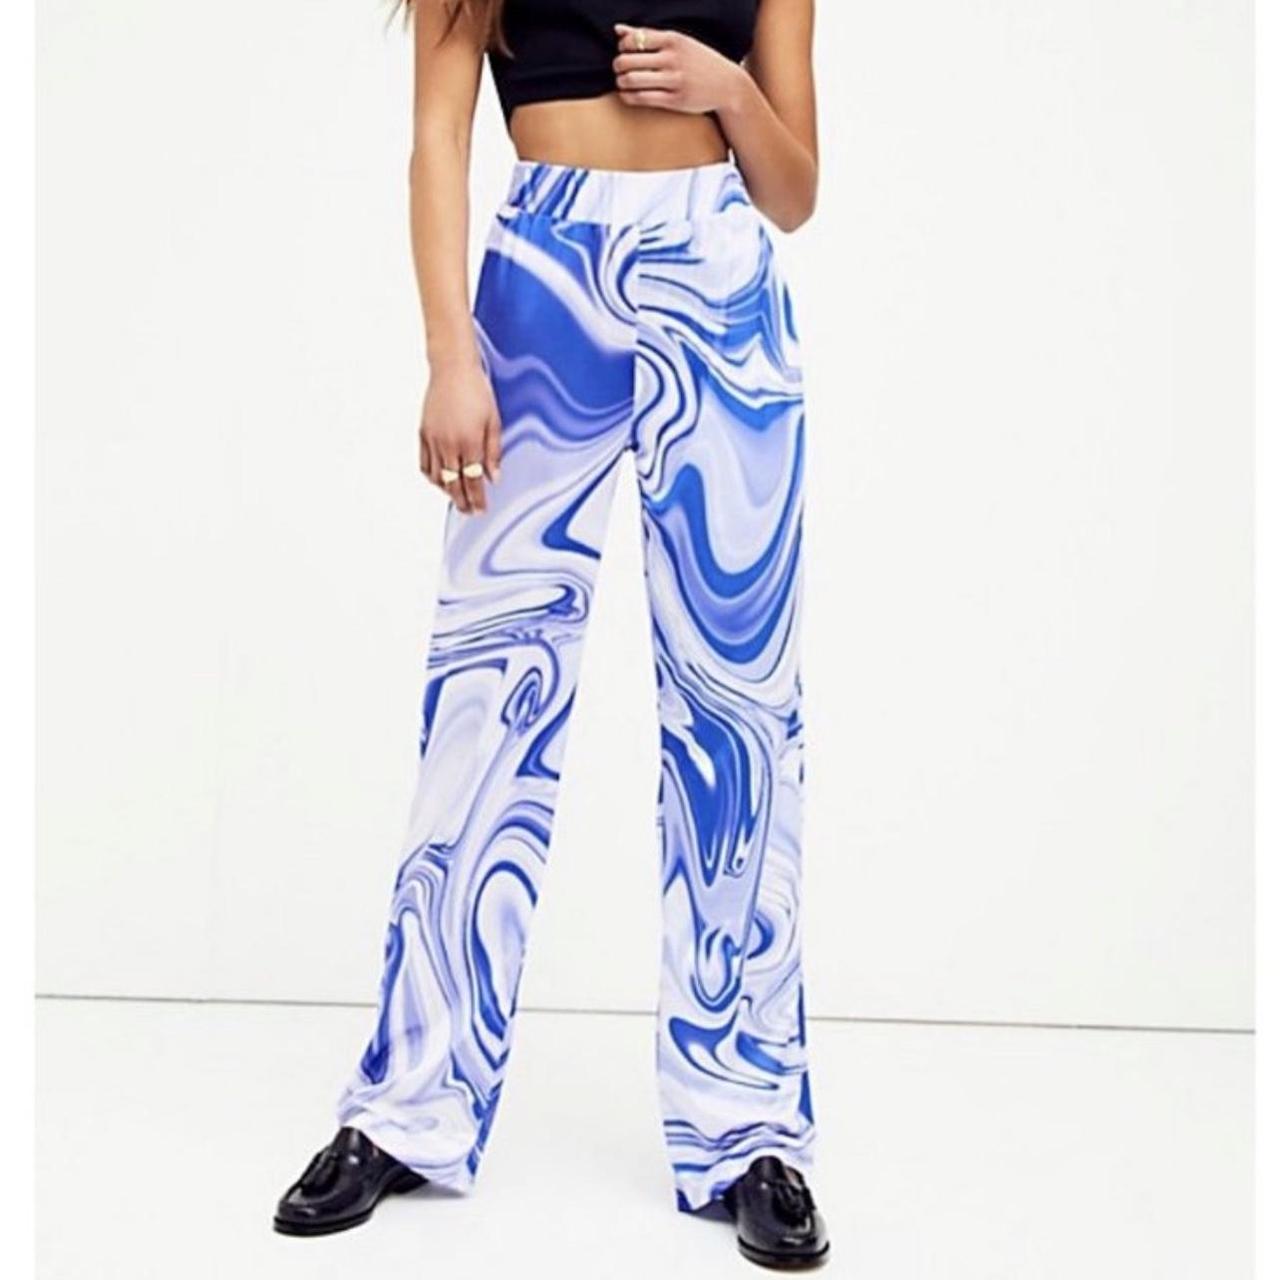 Hosbjerg Women's Blue and White Trousers (4)